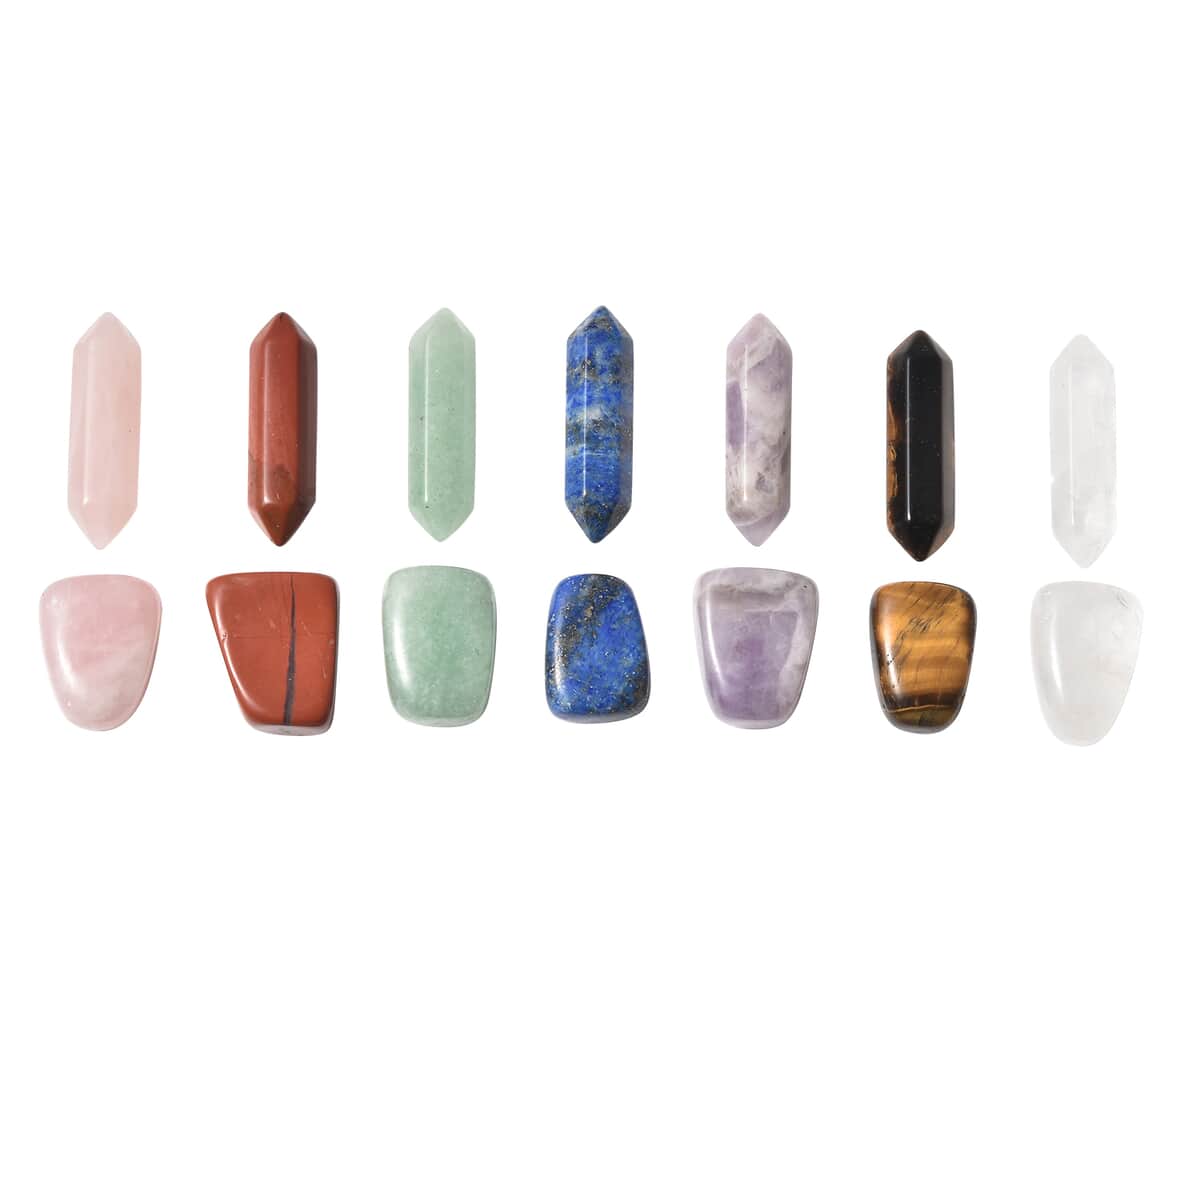 Collectors Variety Pack of Gems (2 Pieces Of Each: Aventurine, Yellow Tiger's Eye, Rose Quartz, Amethyst, Crystal, Red Jasper, Lapis Lazuli) 550ctw image number 3